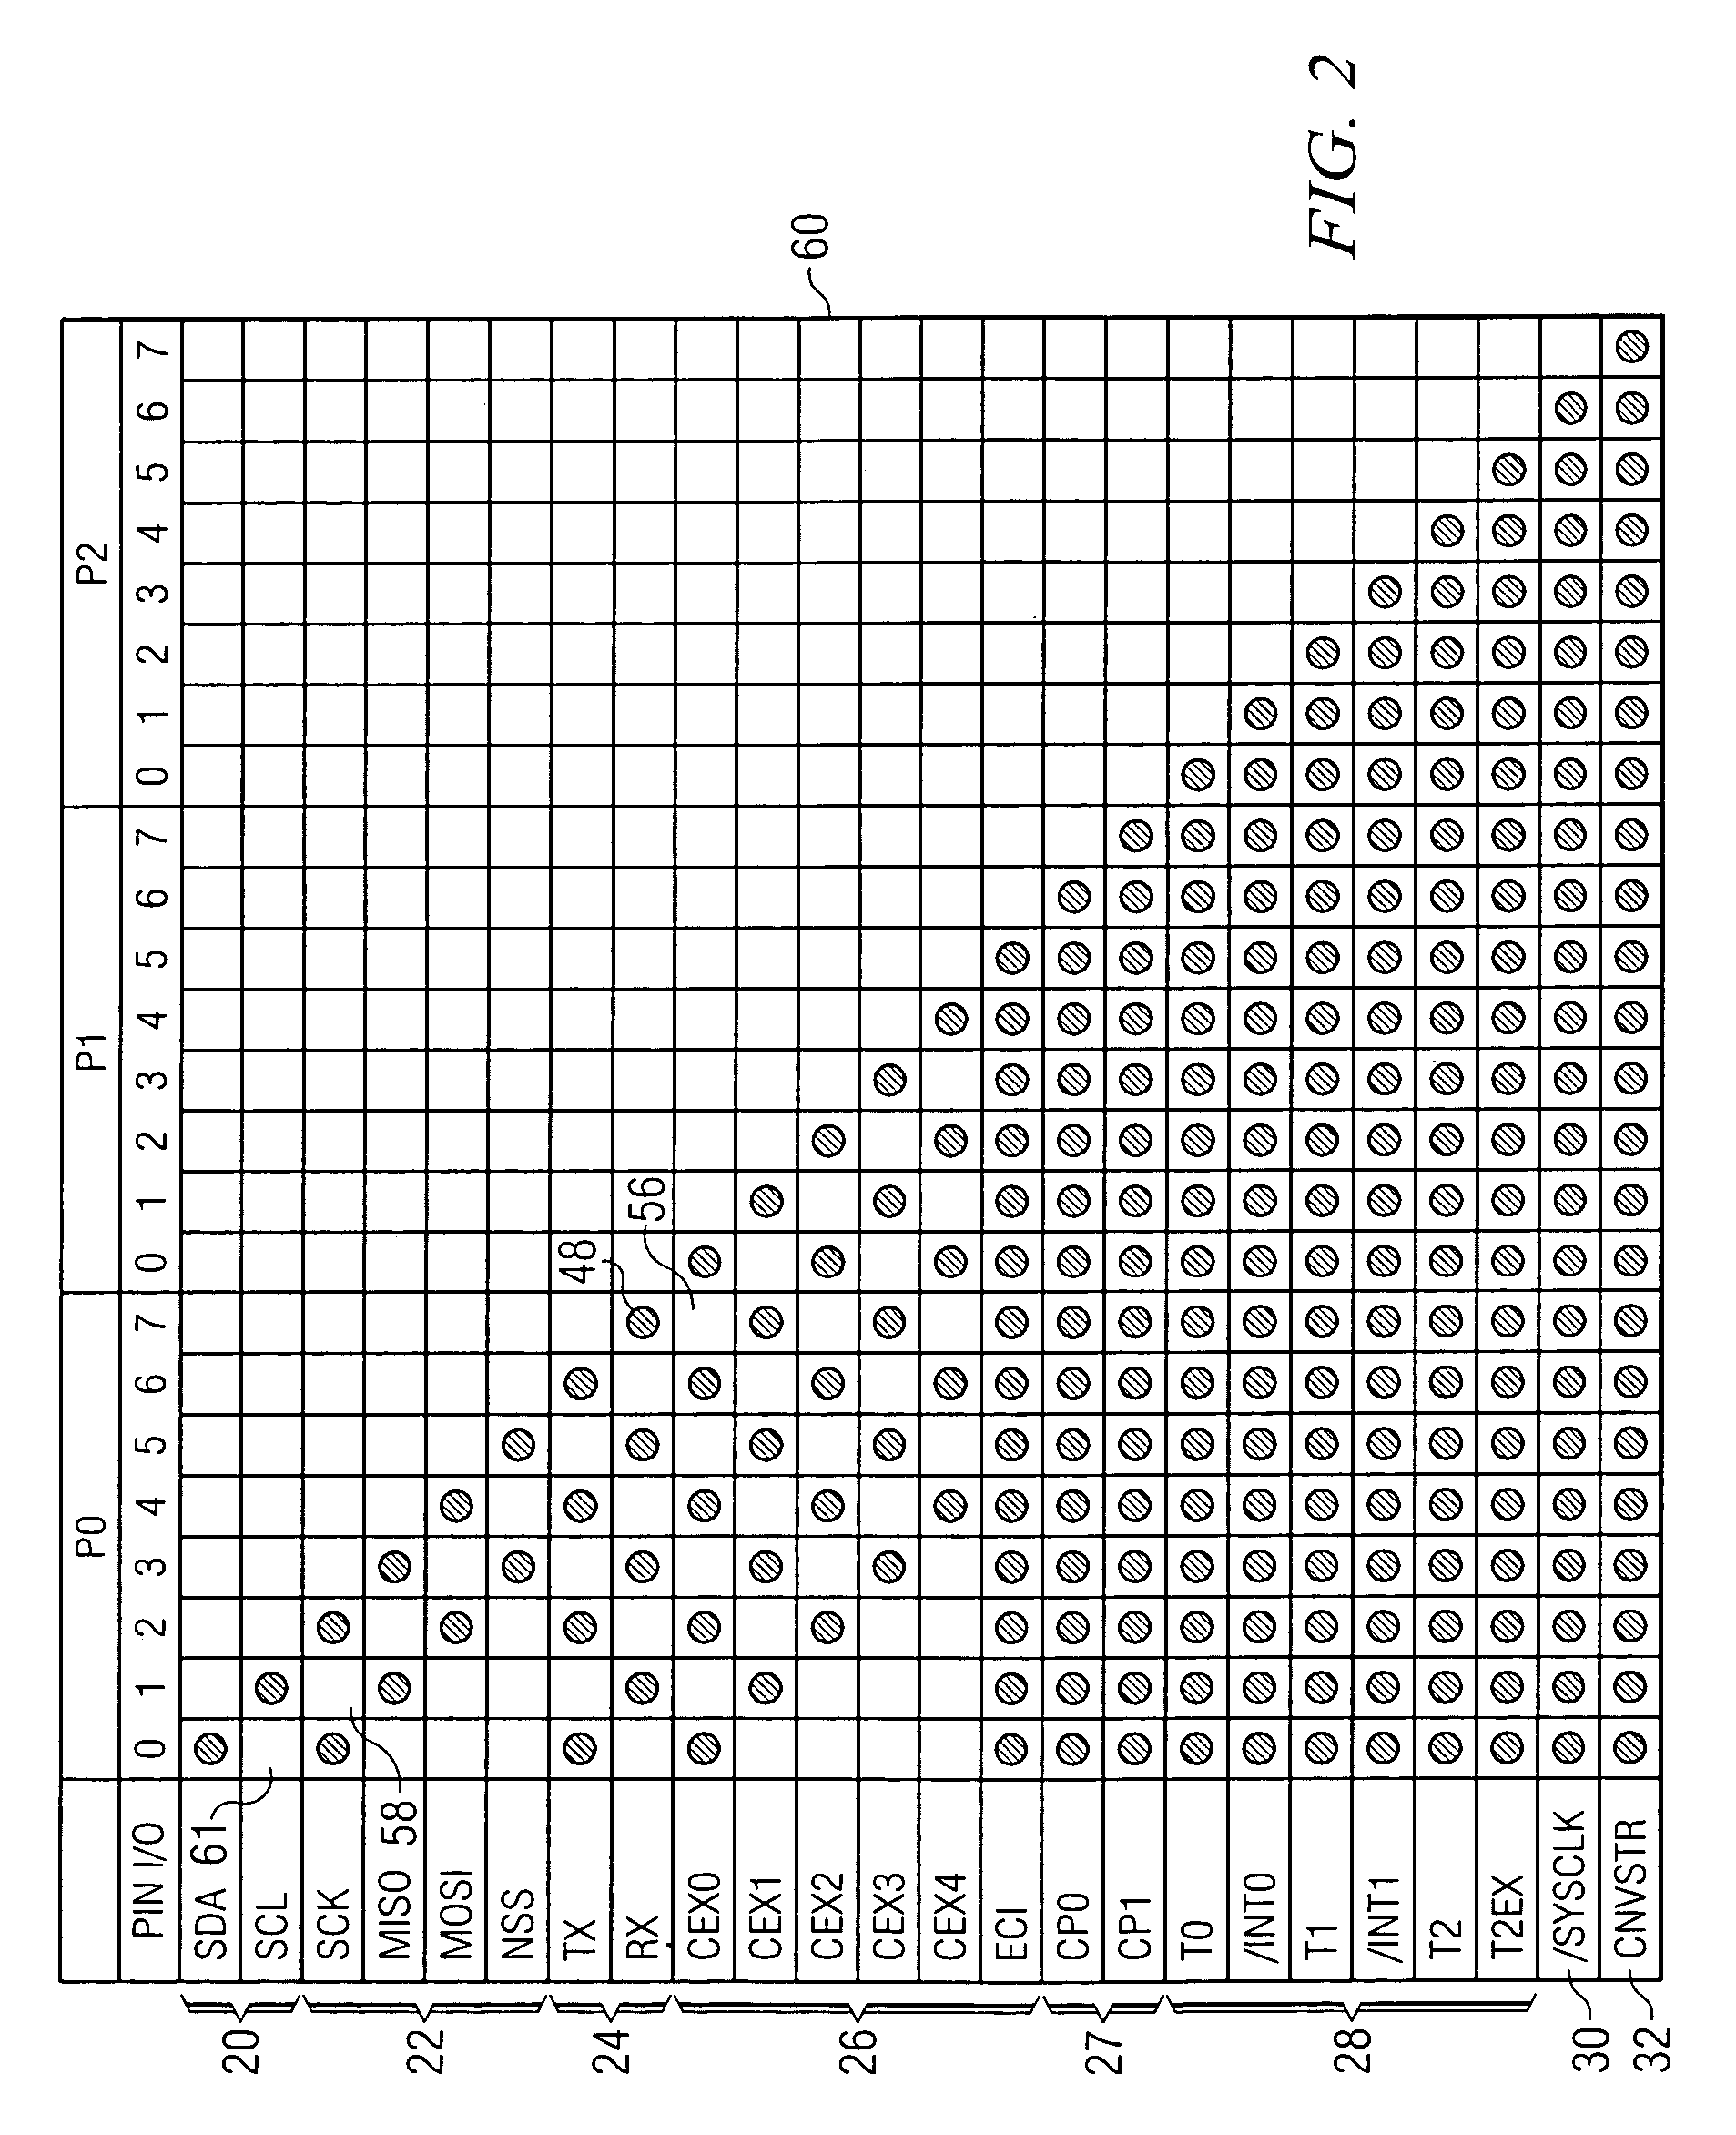 Cross-bar matrix with LCD functionality